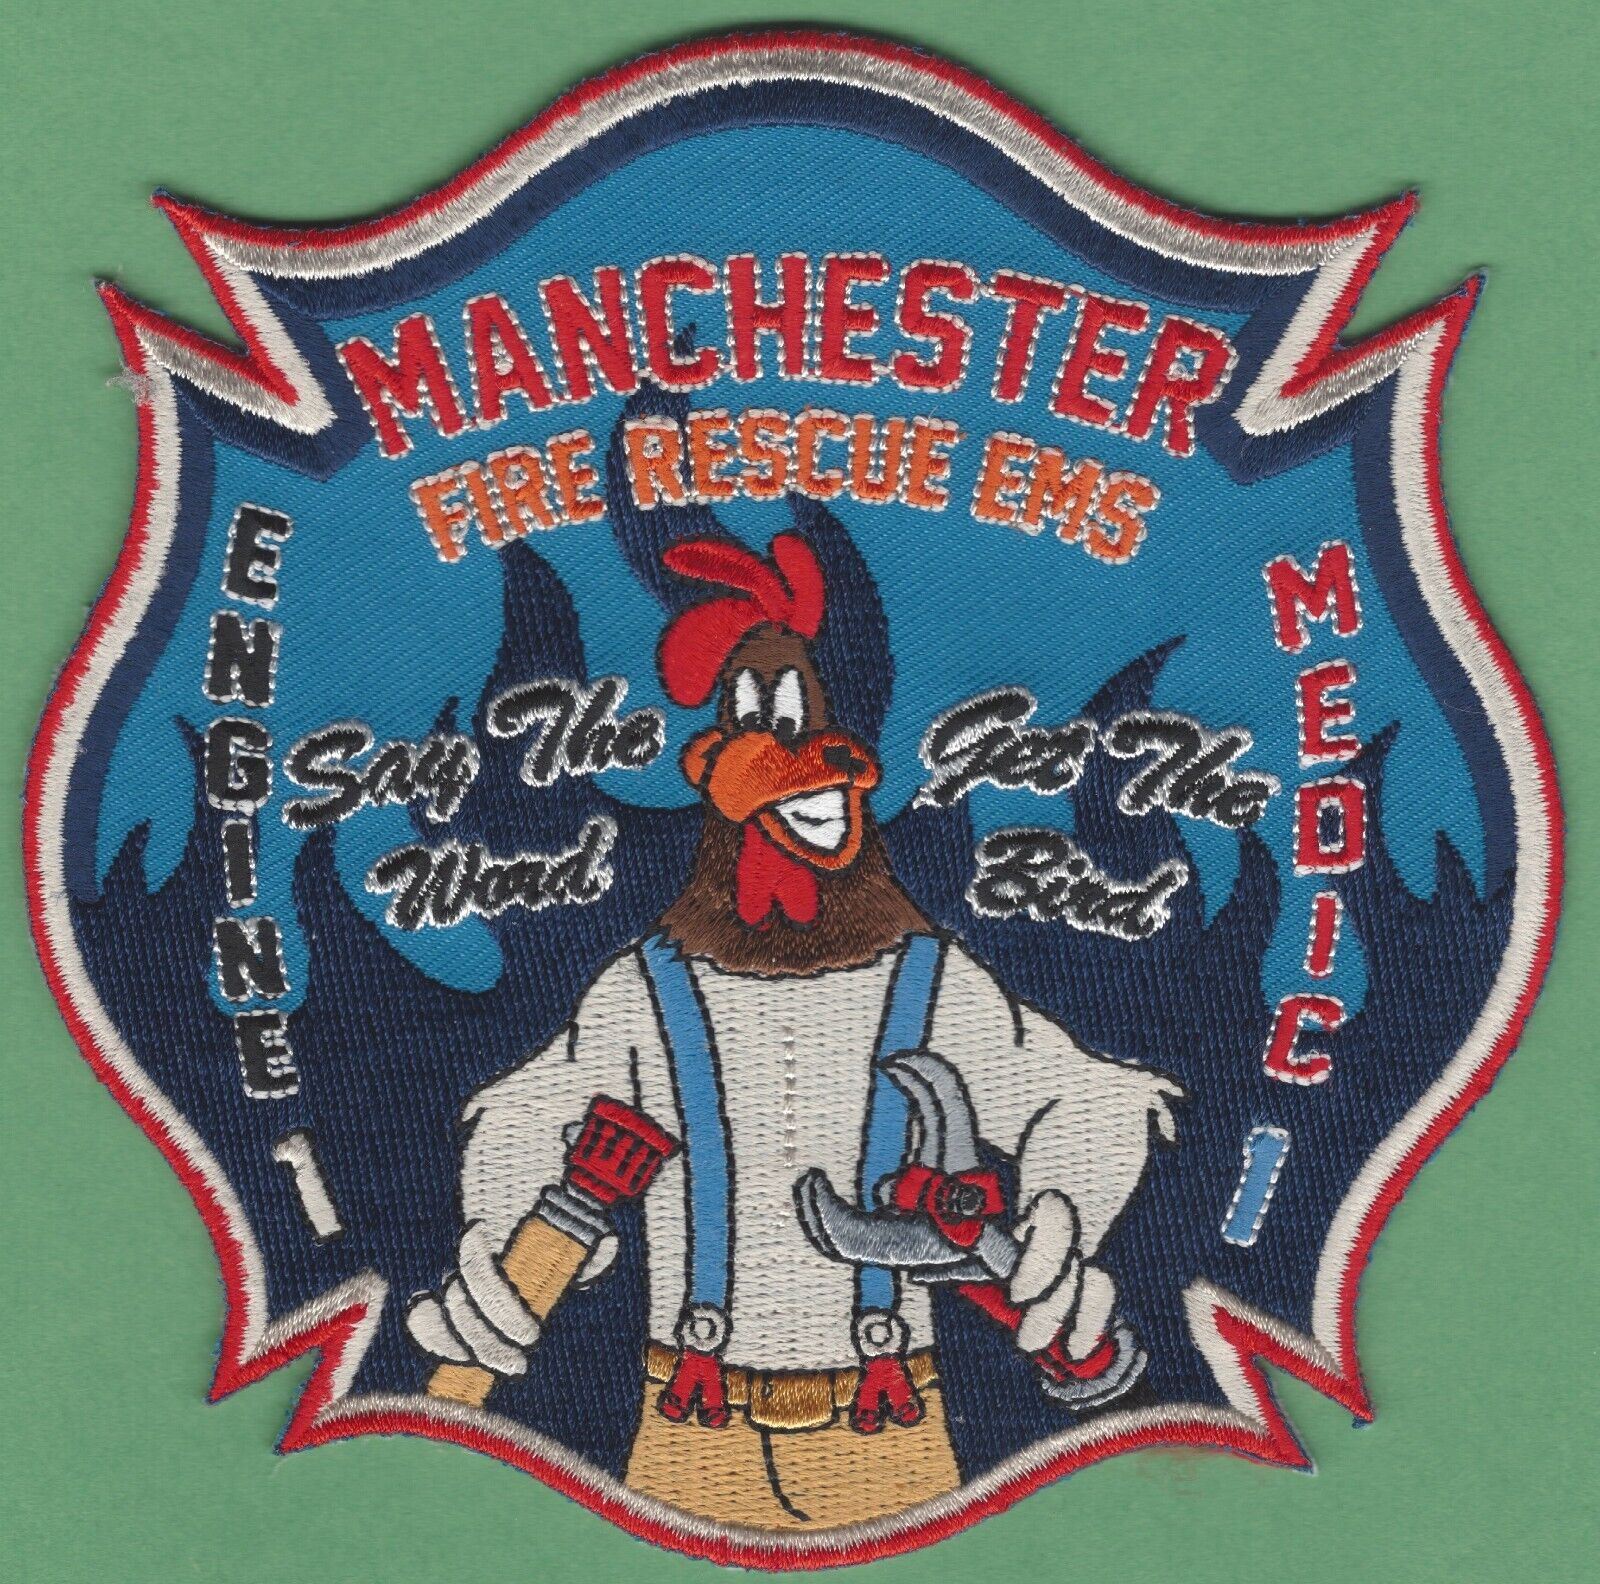 MANCHESTER CONNECTICUT ENGINE 1 MEDIC 1 COMPANY FIRE PATCH